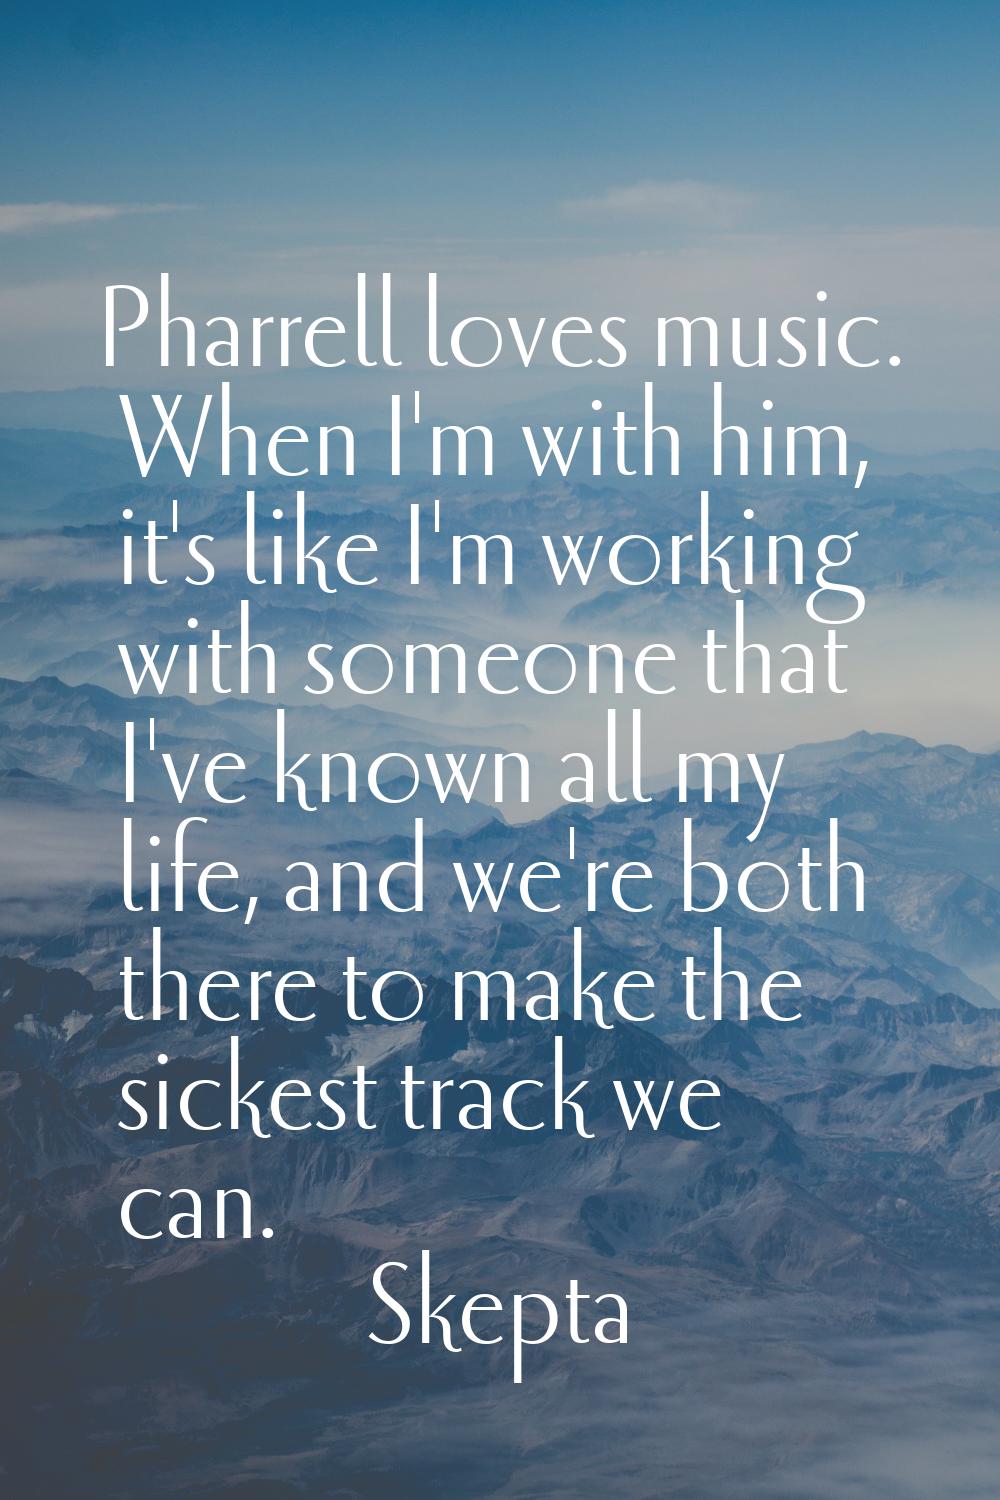 Pharrell loves music. When I'm with him, it's like I'm working with someone that I've known all my 